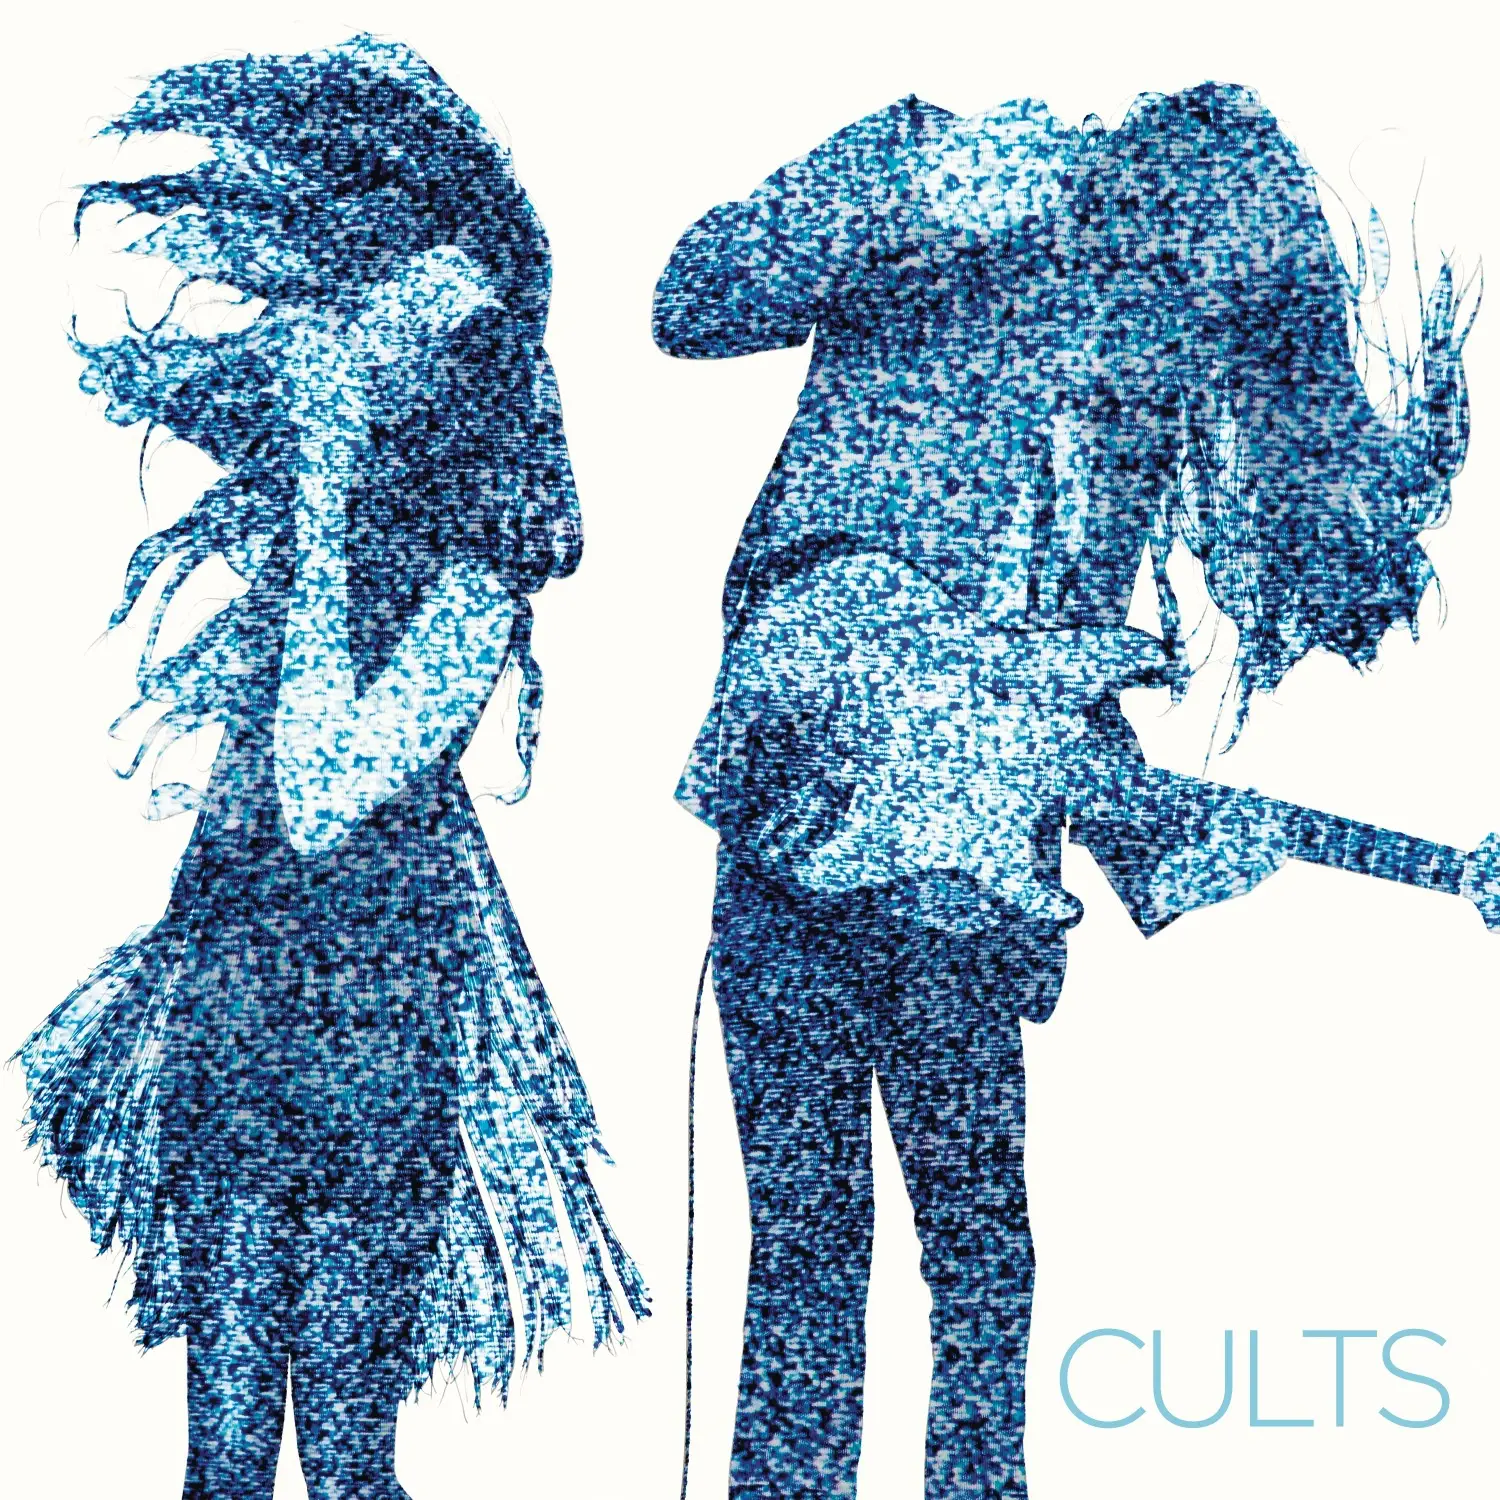 <strong>Cults - Static</strong> (Vinyl LP - blue)